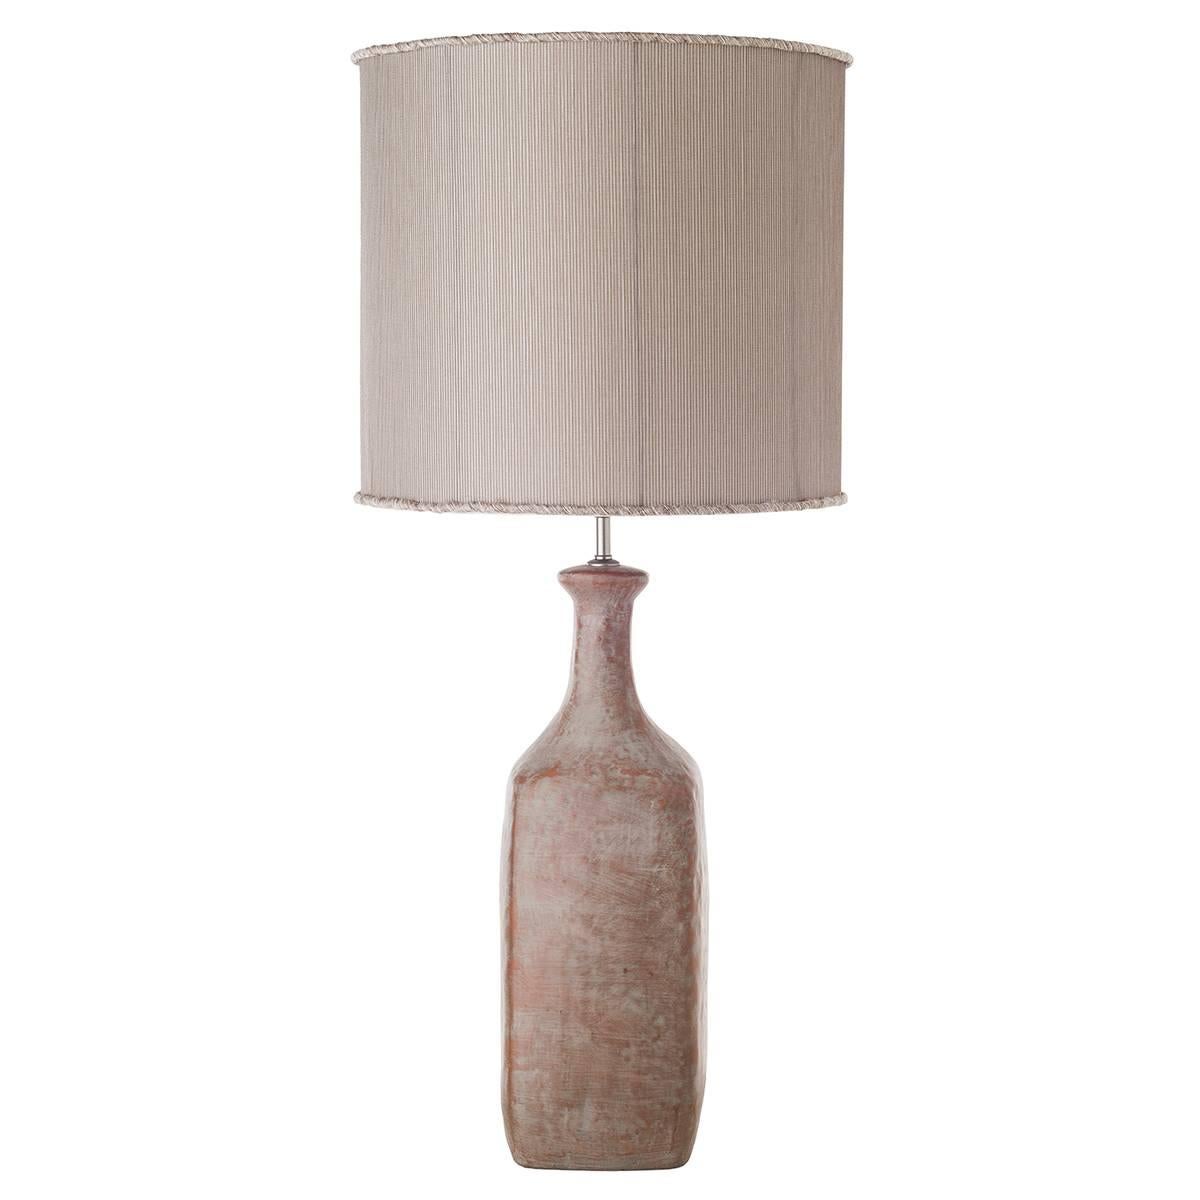 Bottle-shaped ceramic table lamps with shades.

The body of the lamps is characterized by a bottle shape and is decorated with a refined grey-stone patina. The table lamps are completed by a cylindrical shade in sand color. Warm hues make them